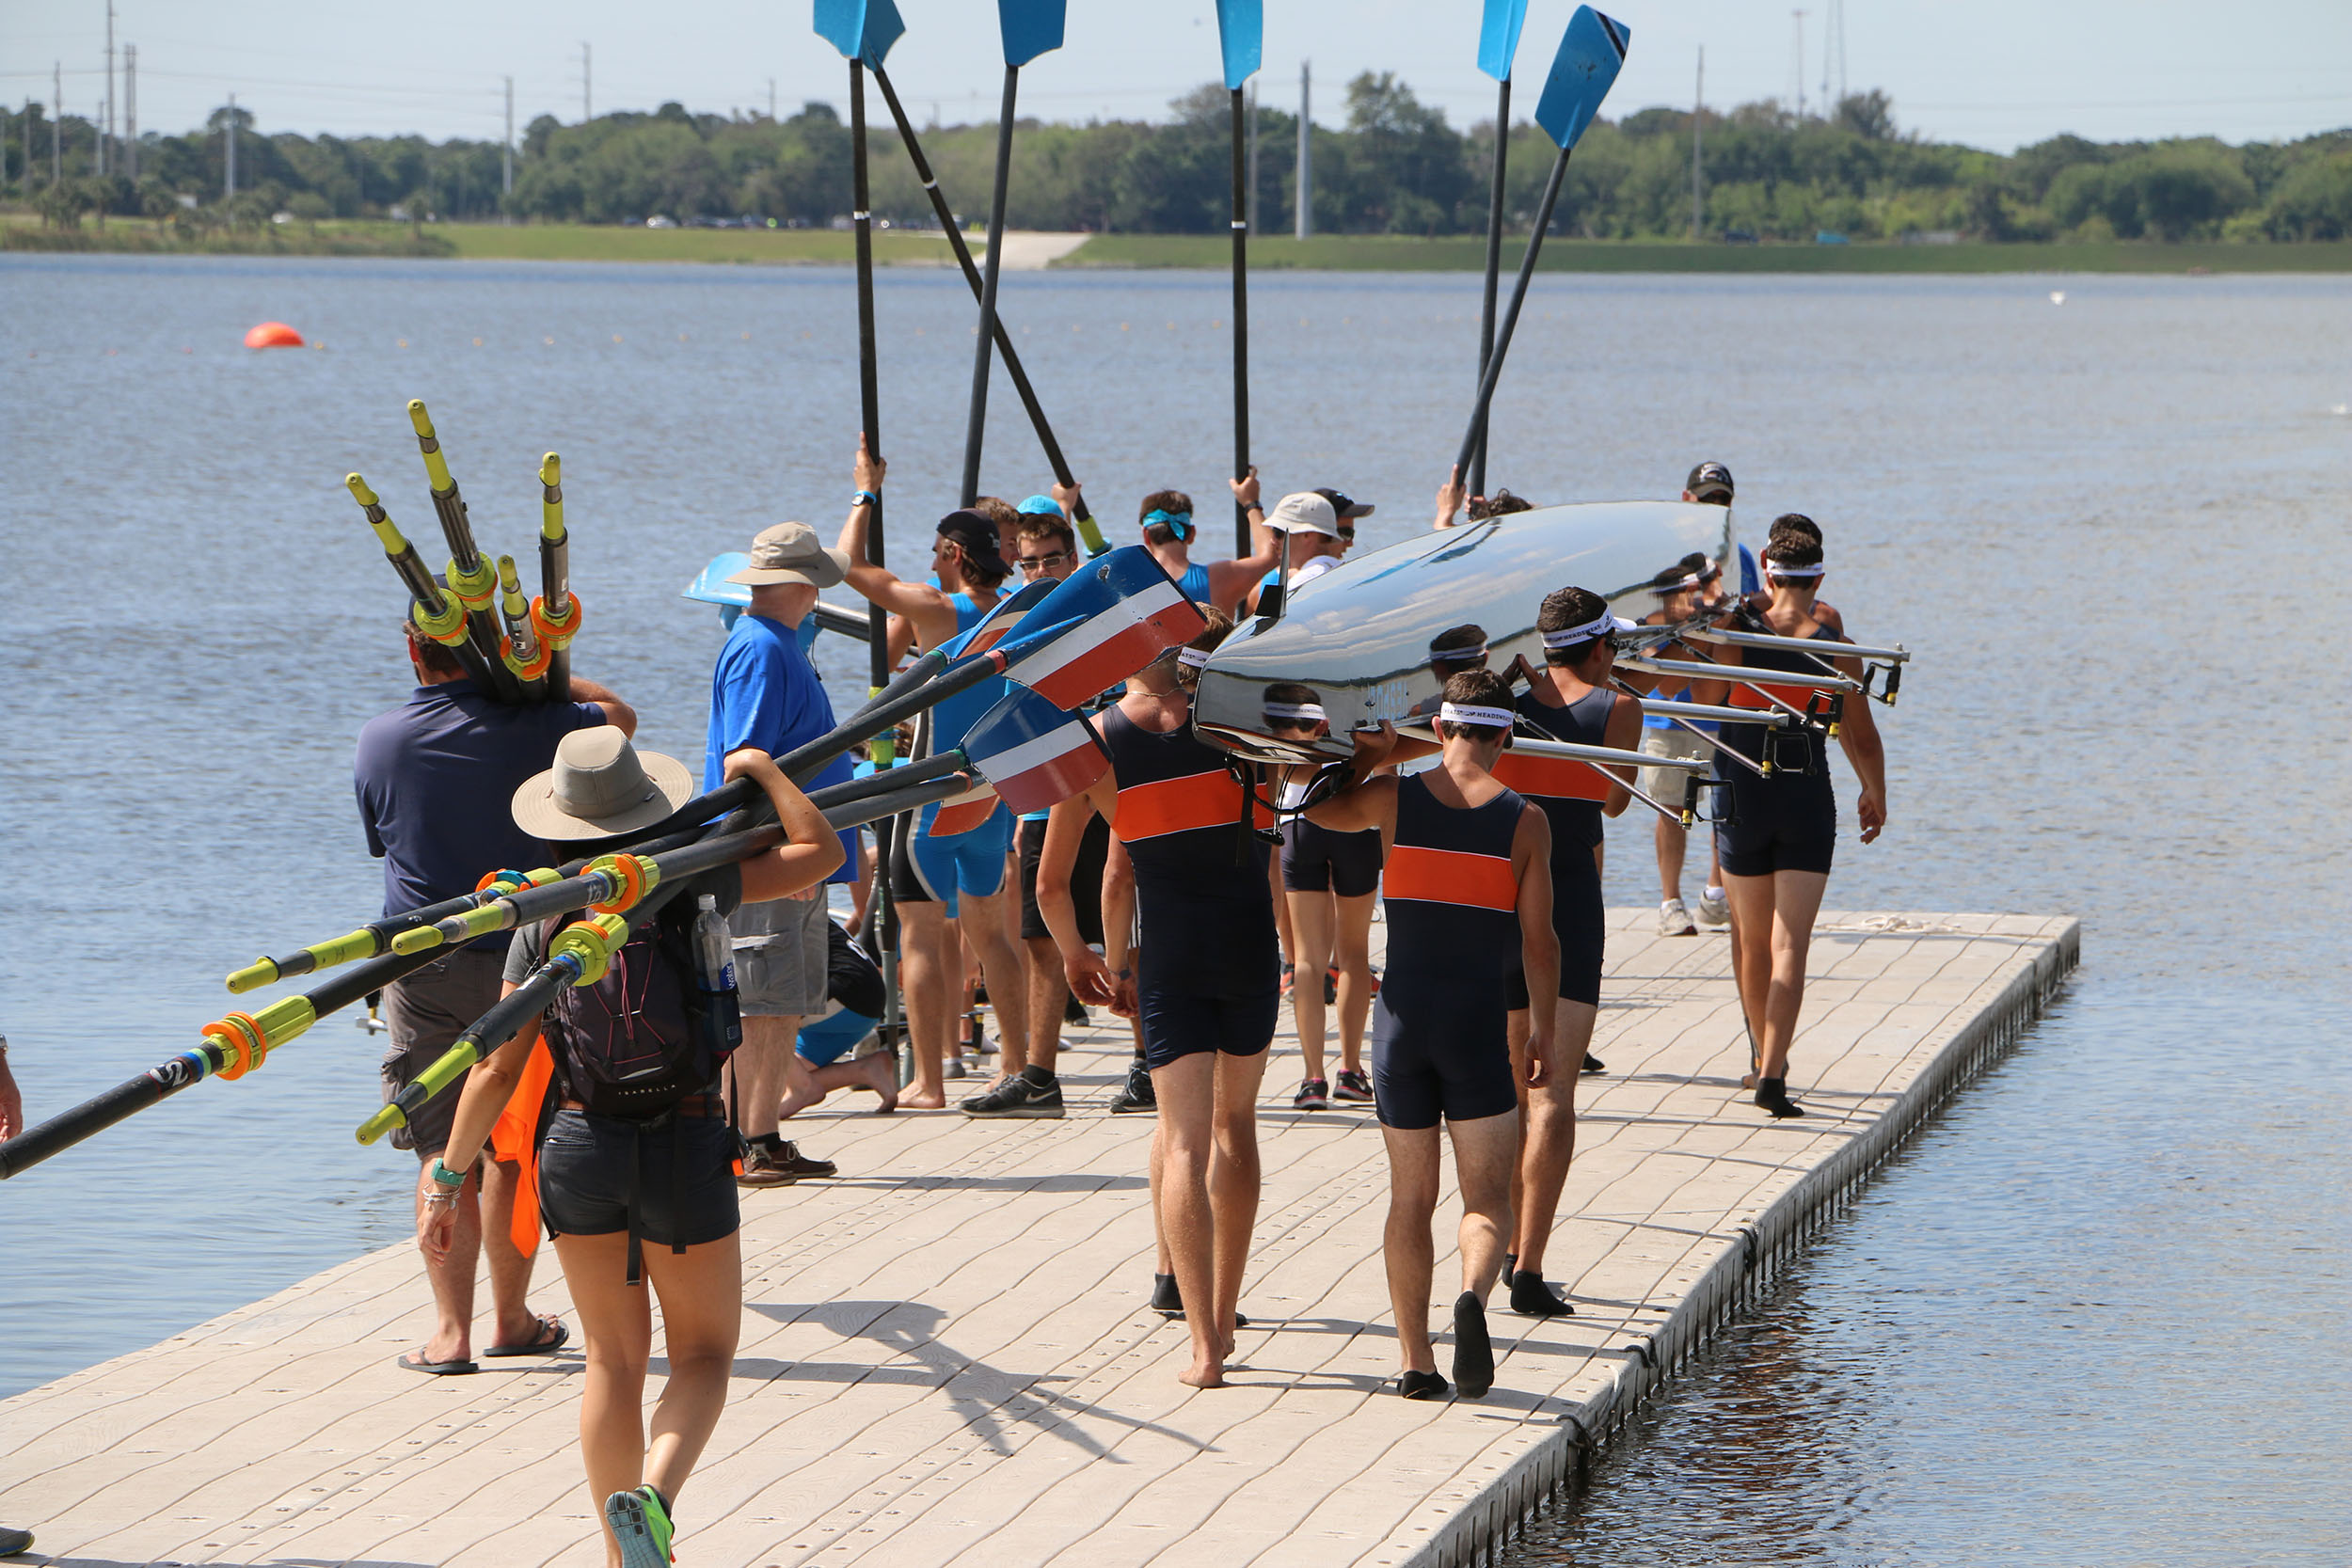 Rowing regatta teams bring their boats to a river for practice.